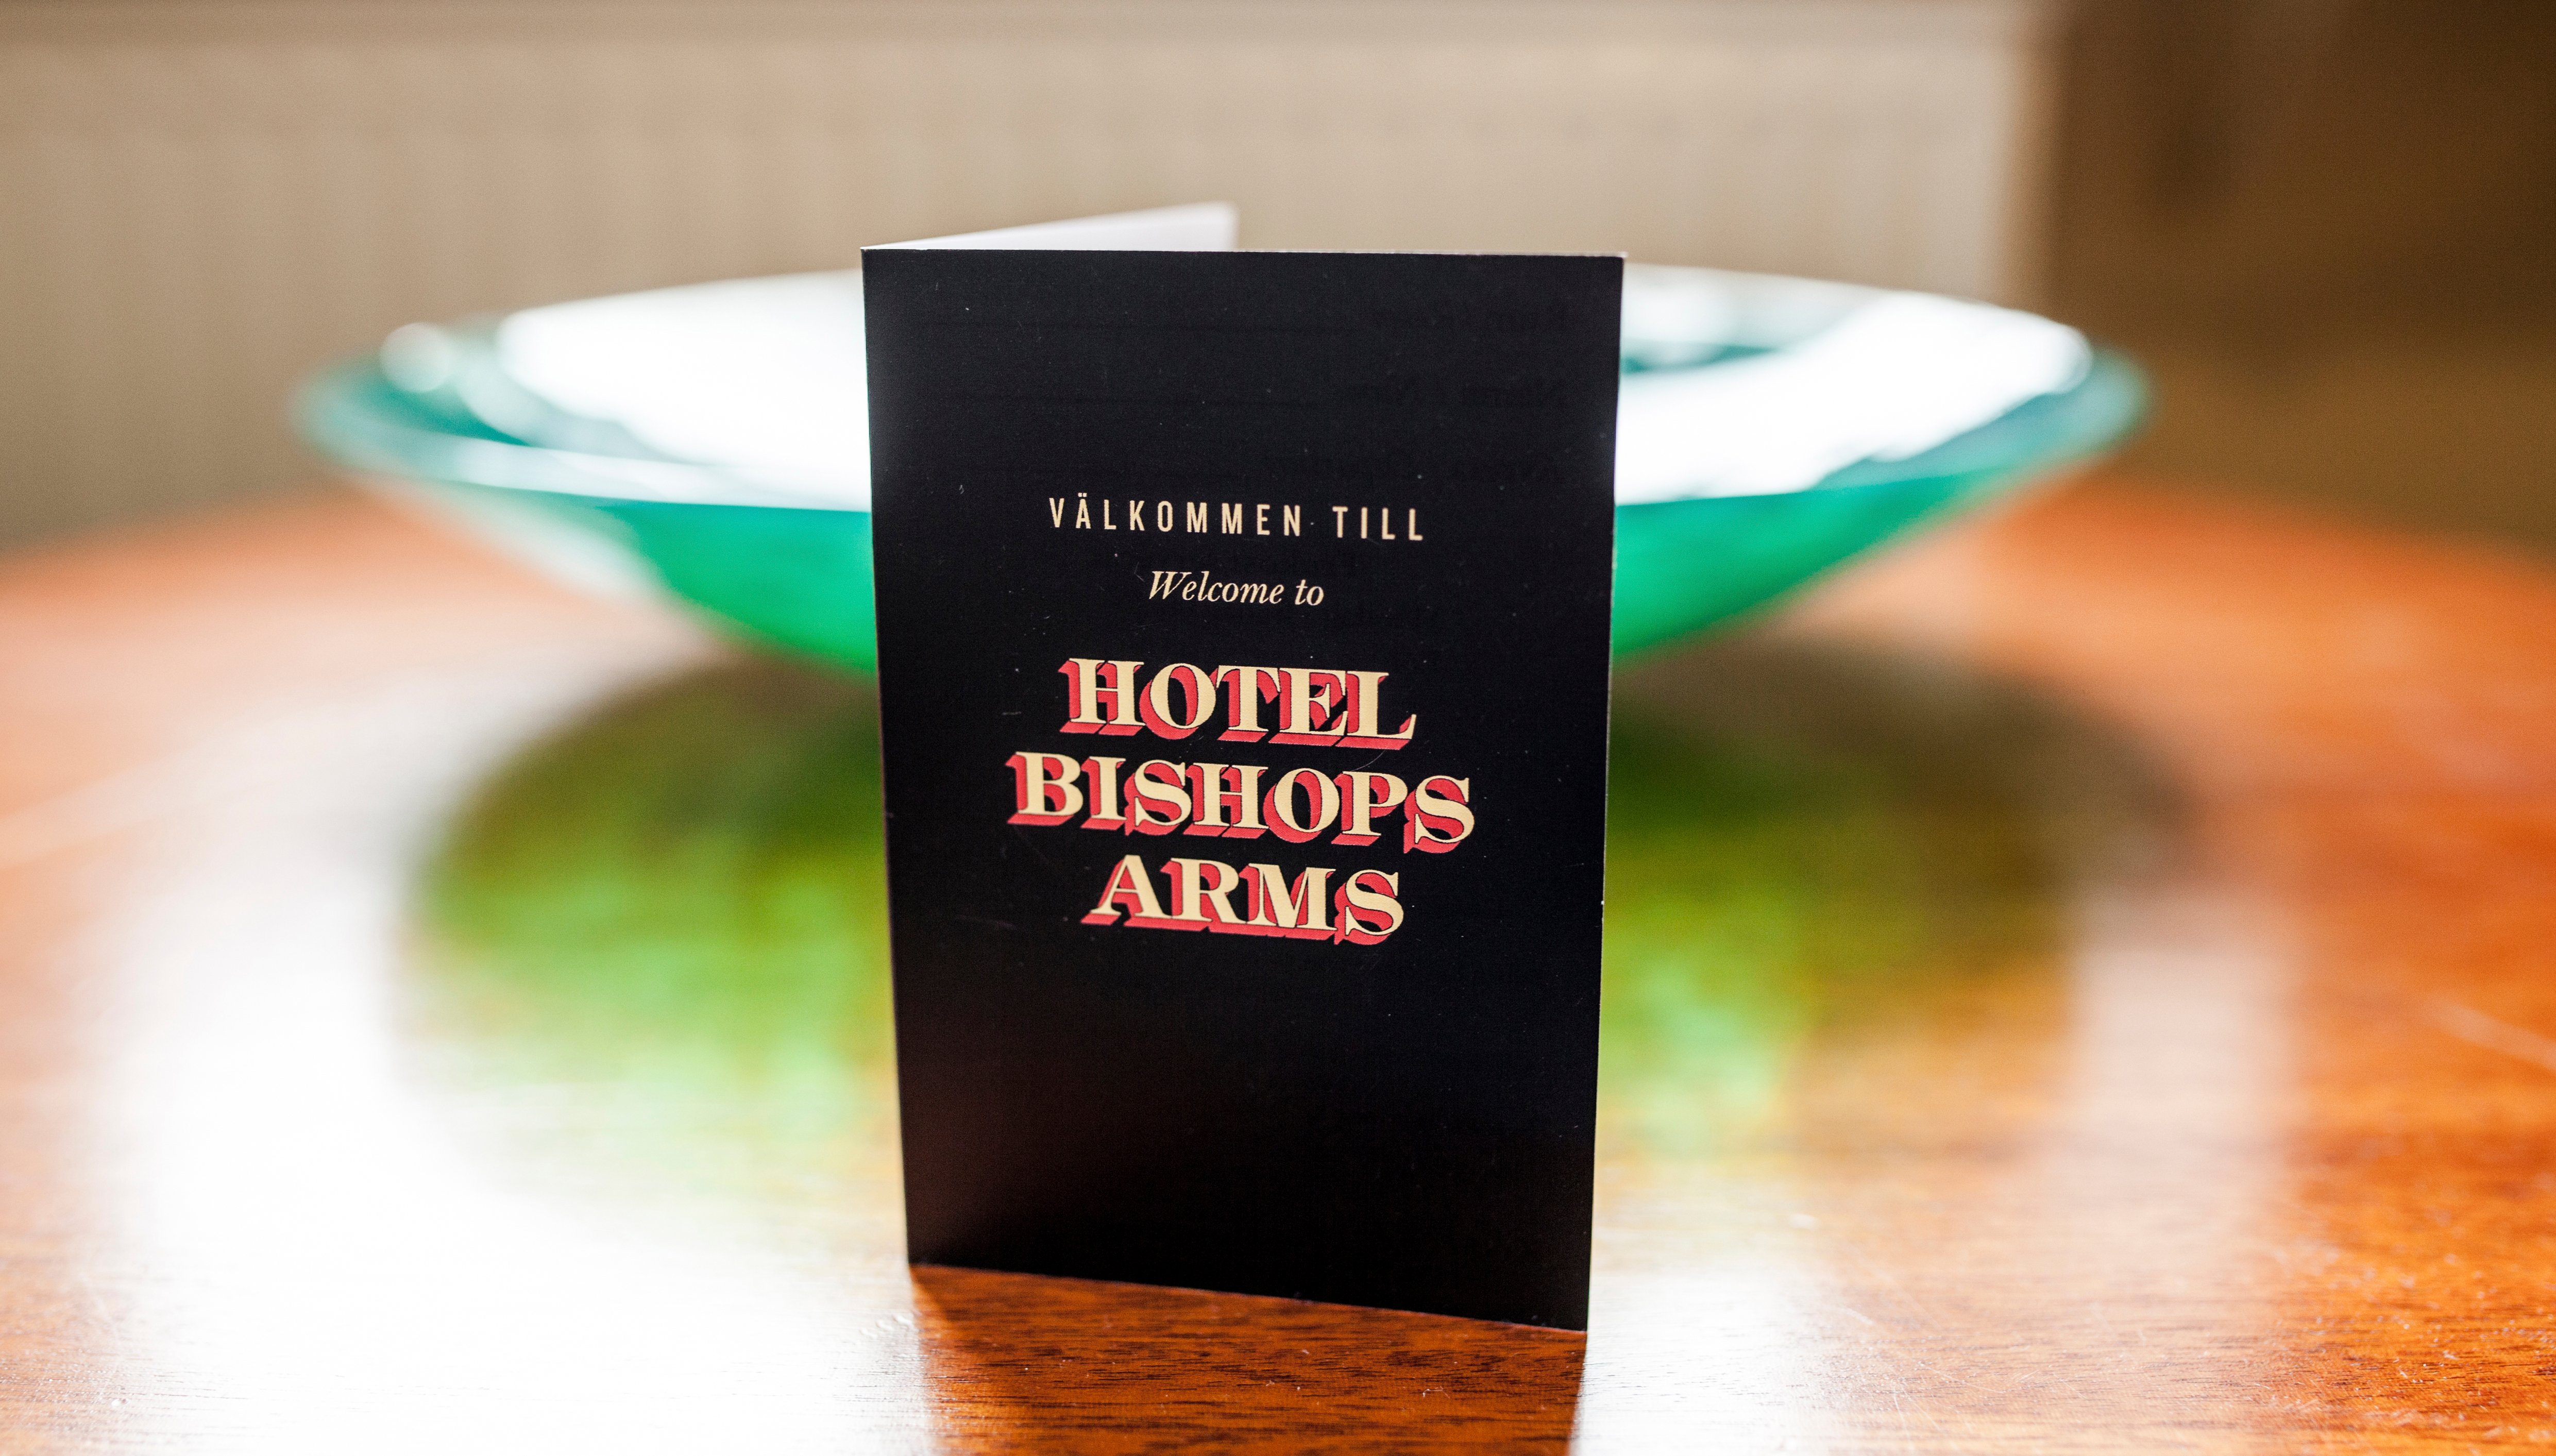 Close-up of sign reading "Welcome to Hotel Bishops Arms"